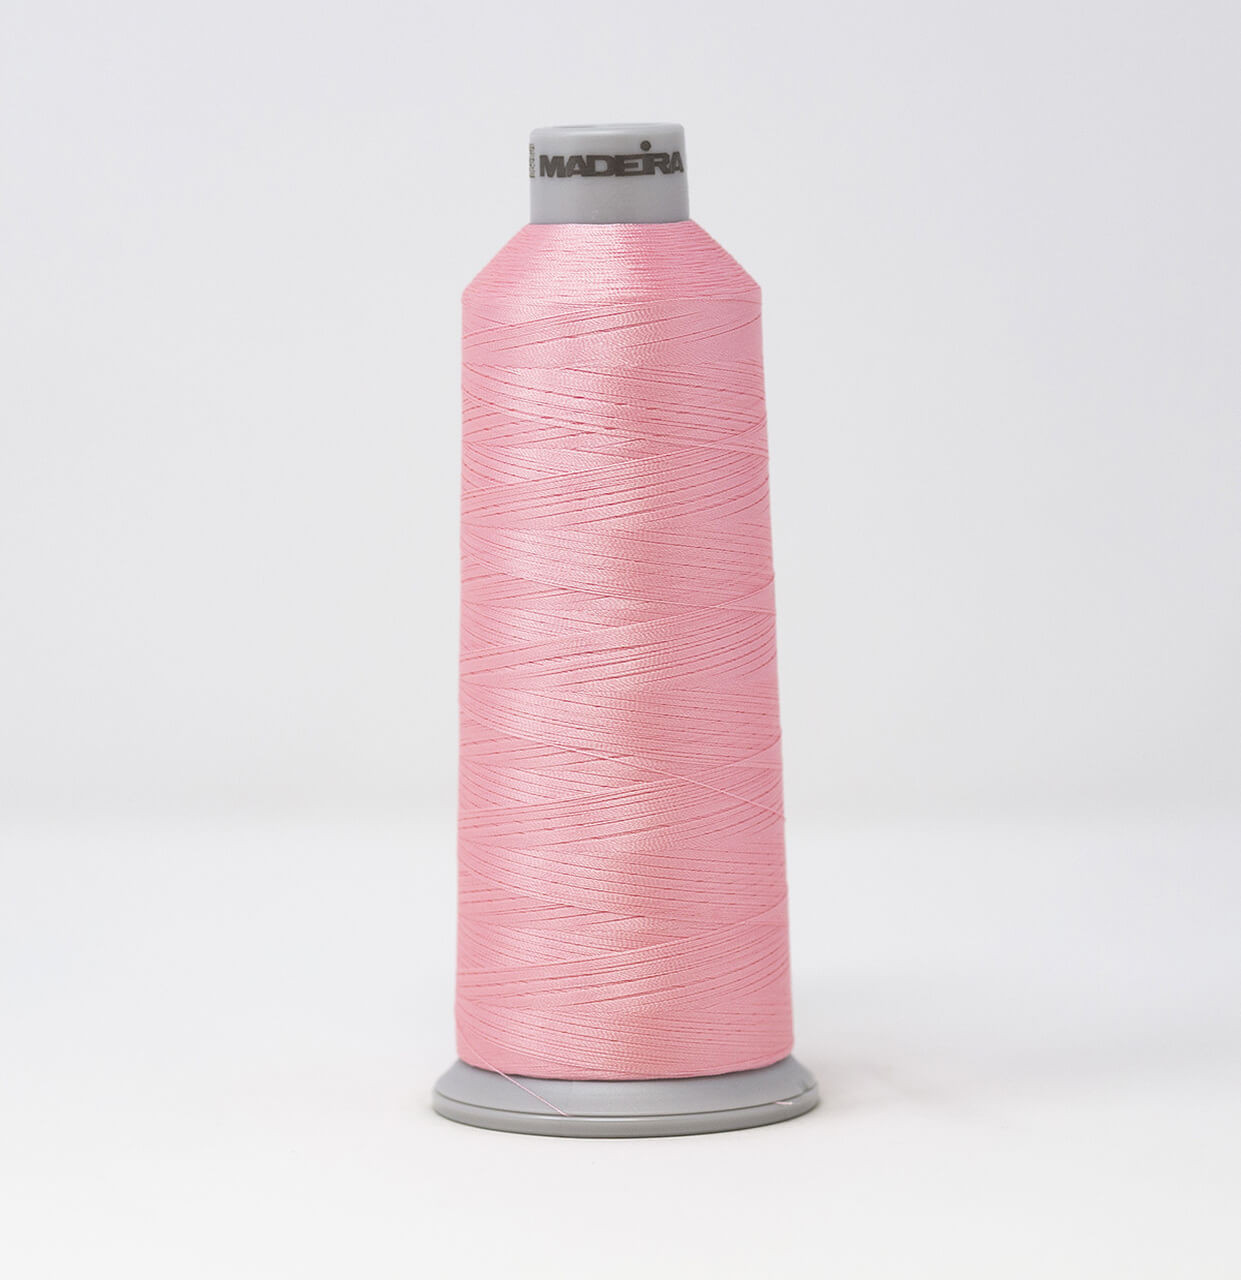 Madeira, Polyneon, Polyester Thread, 918-1816 (Rustic Pink)